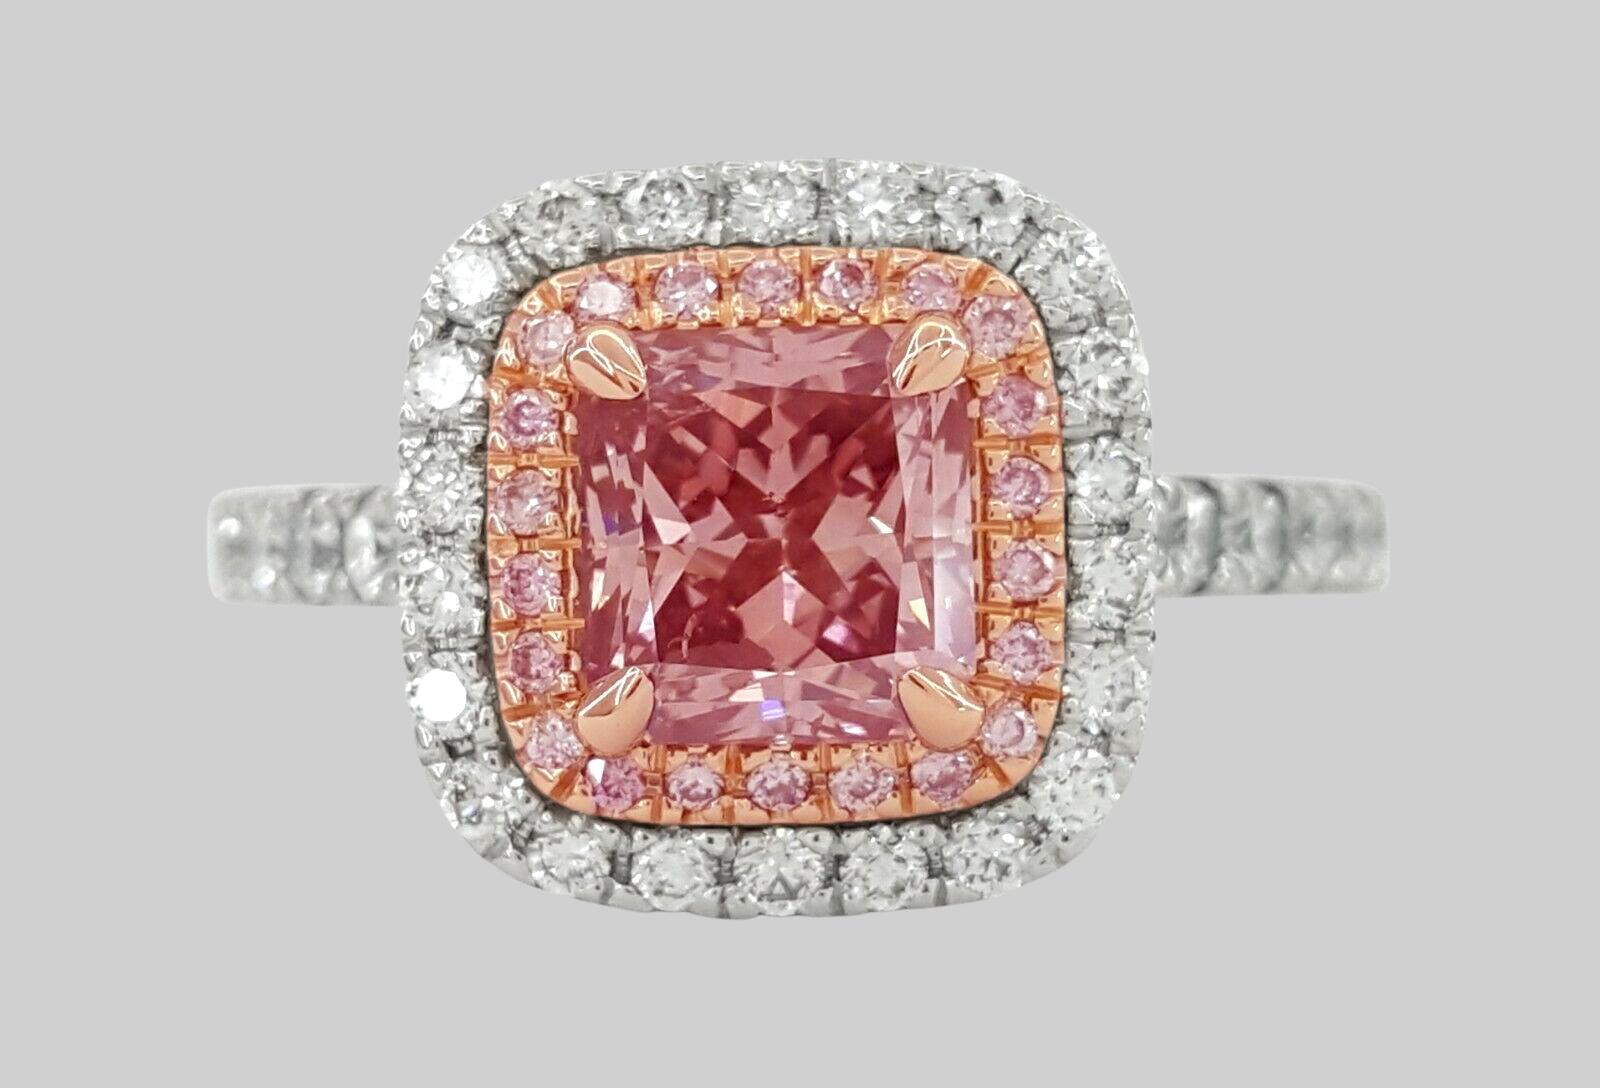 3ct total weight Platinum 18K Rose Gold Radiant Cut Natural Fancy Orangy-Pink Diamond Double Halo Engagement Ring. 
The ring weighs 7 grams, size 6, the center stone is a 2 ct Natural Radiant Cut, Fancy Intense Pink (the diamond main color is Pink,